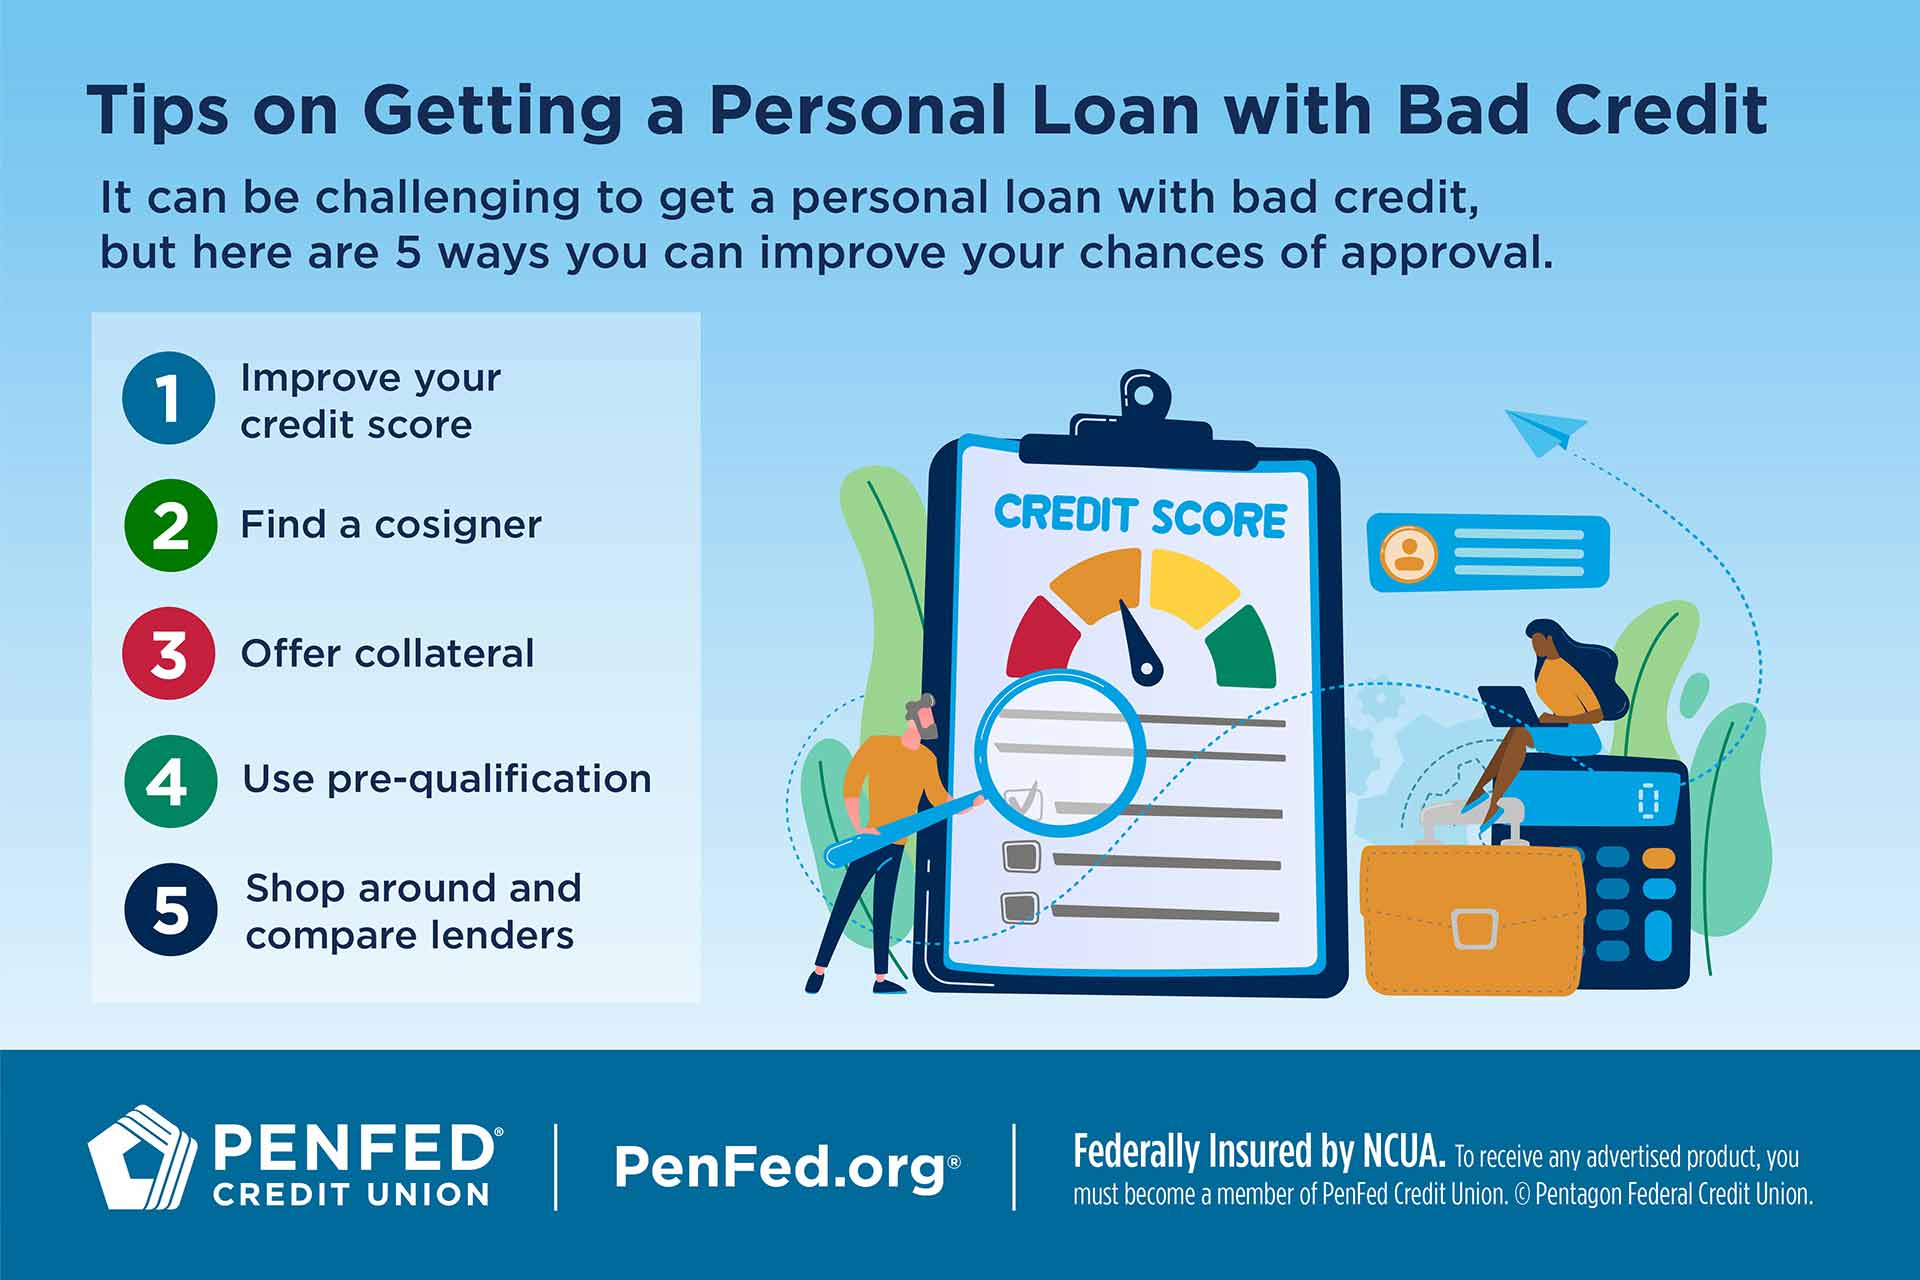 Infographic_Tips-on-Getting-a-Personal-Loan-with-Bad-Credit_1920x1280.jpg